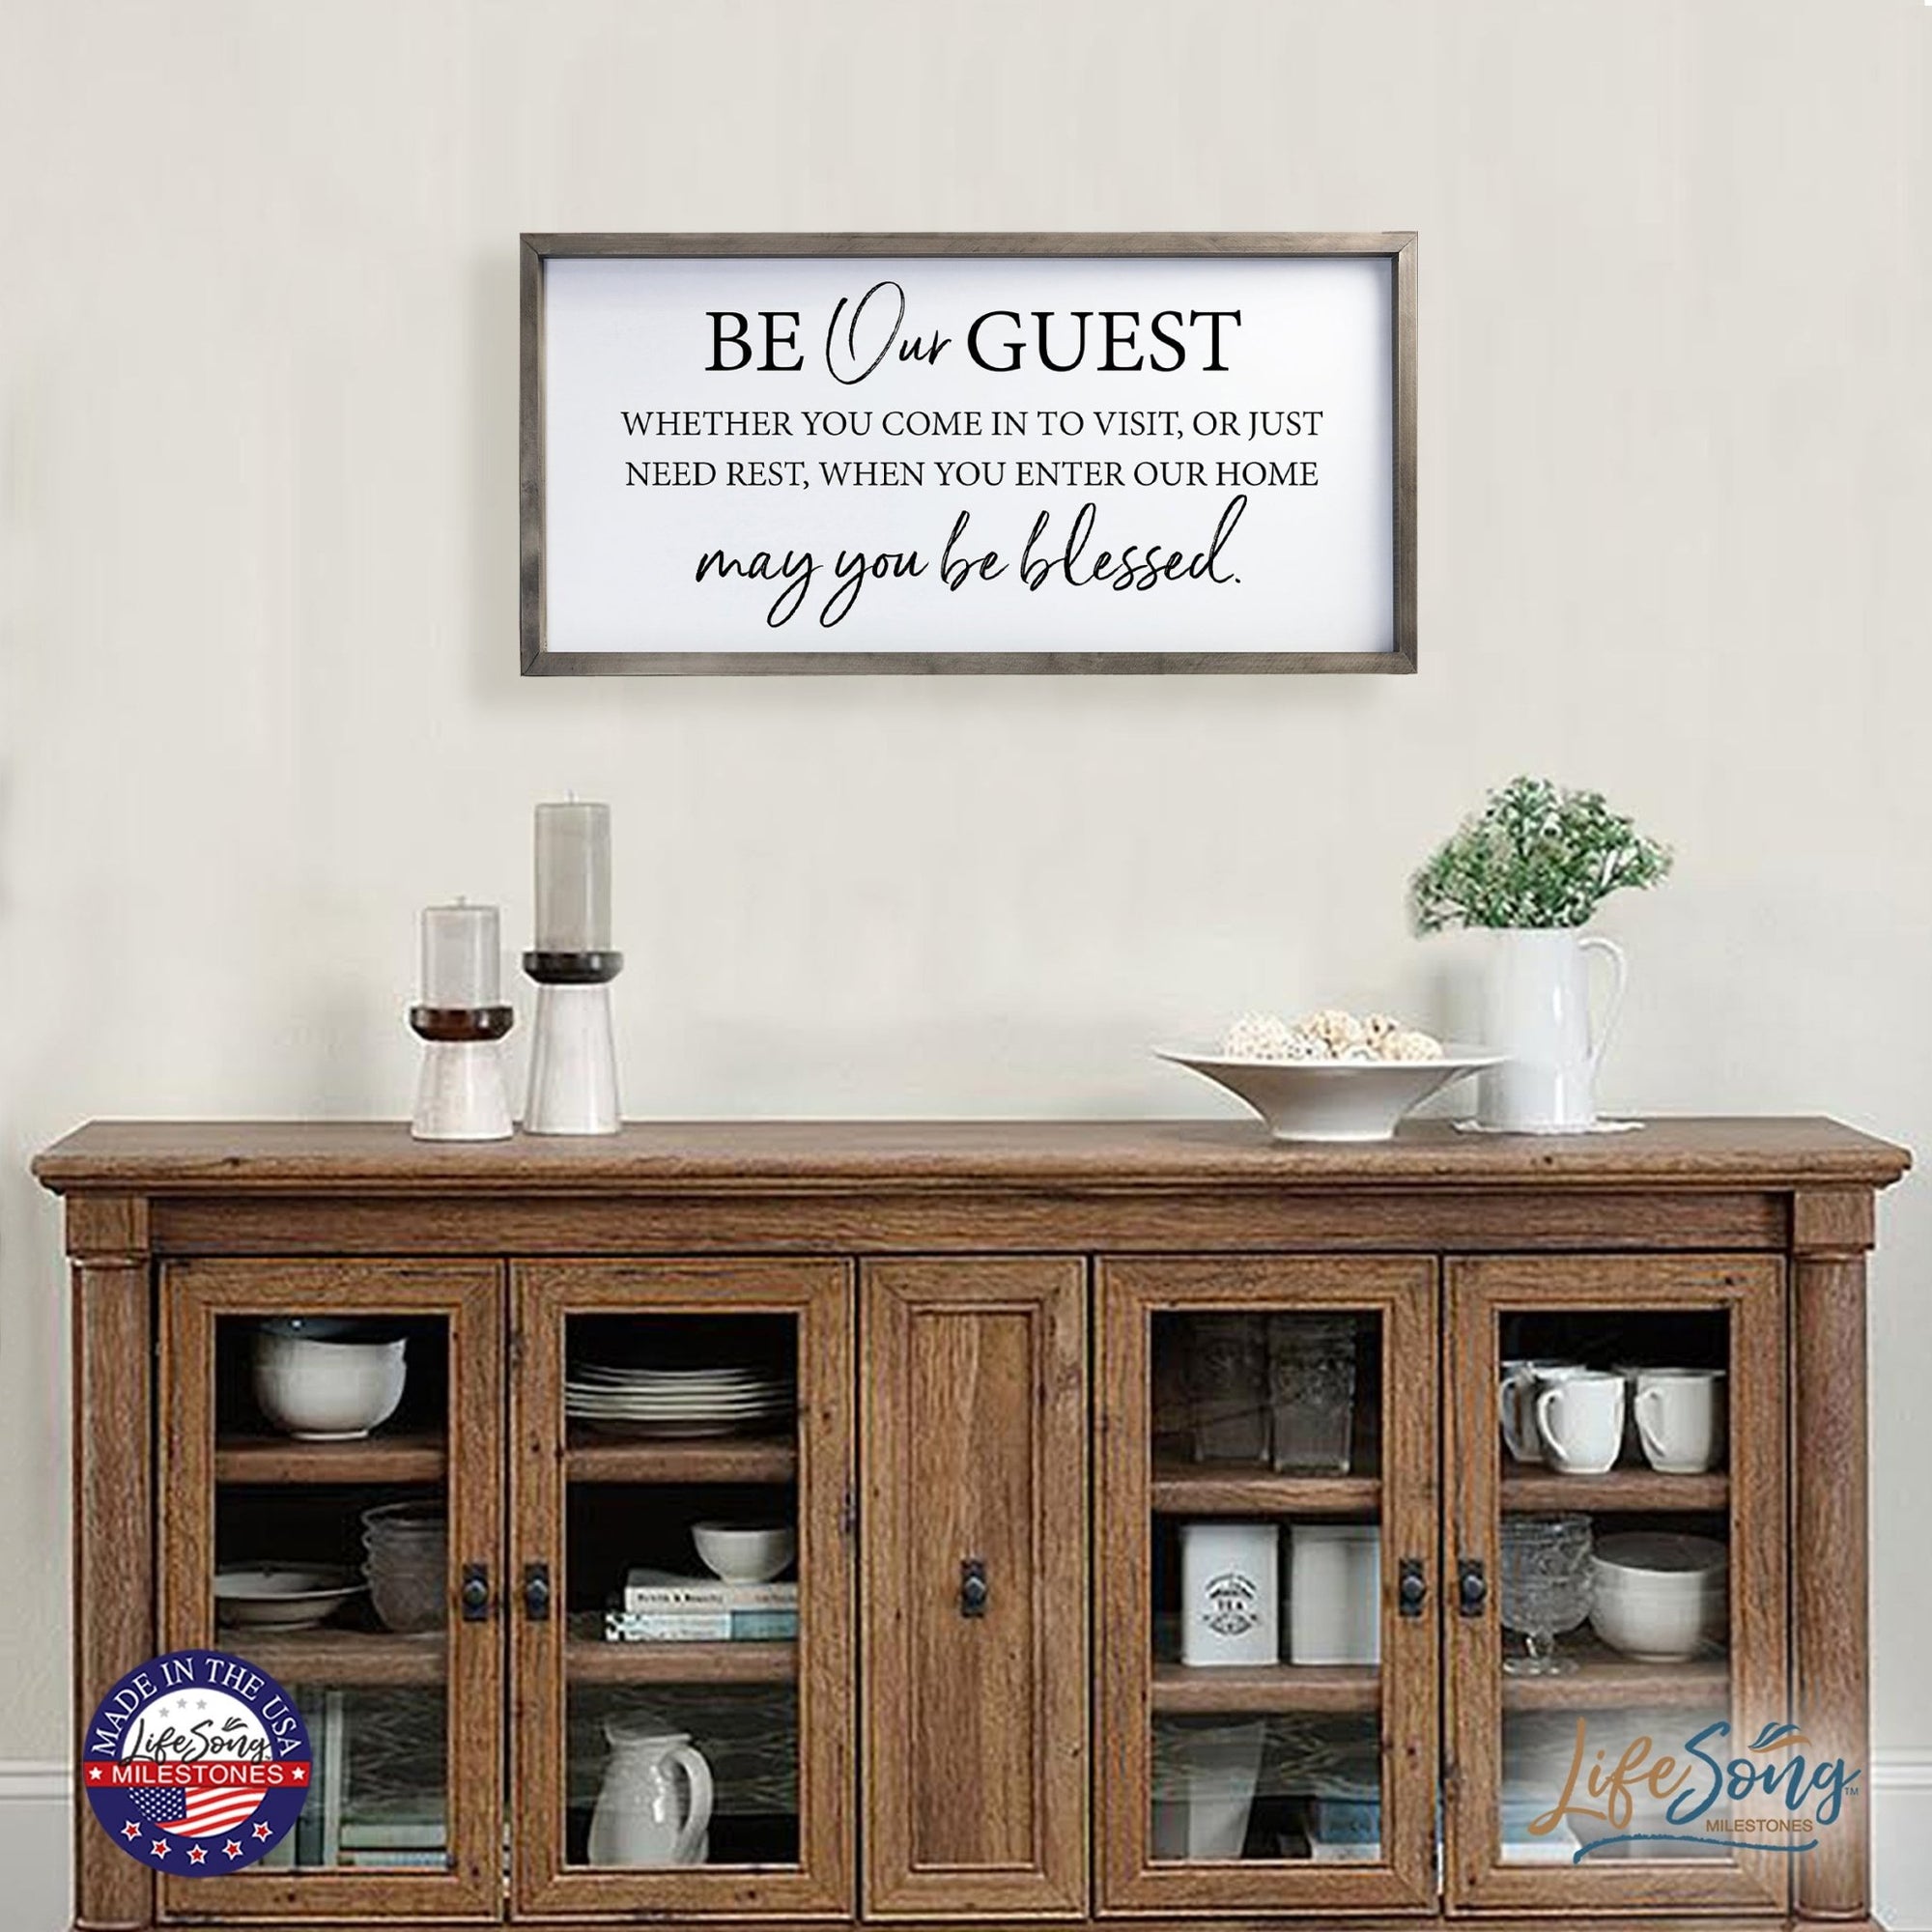 Large Family Wall Decor Quote Sign For Home 18 x 36 - Be Our Guest - LifeSong Milestones